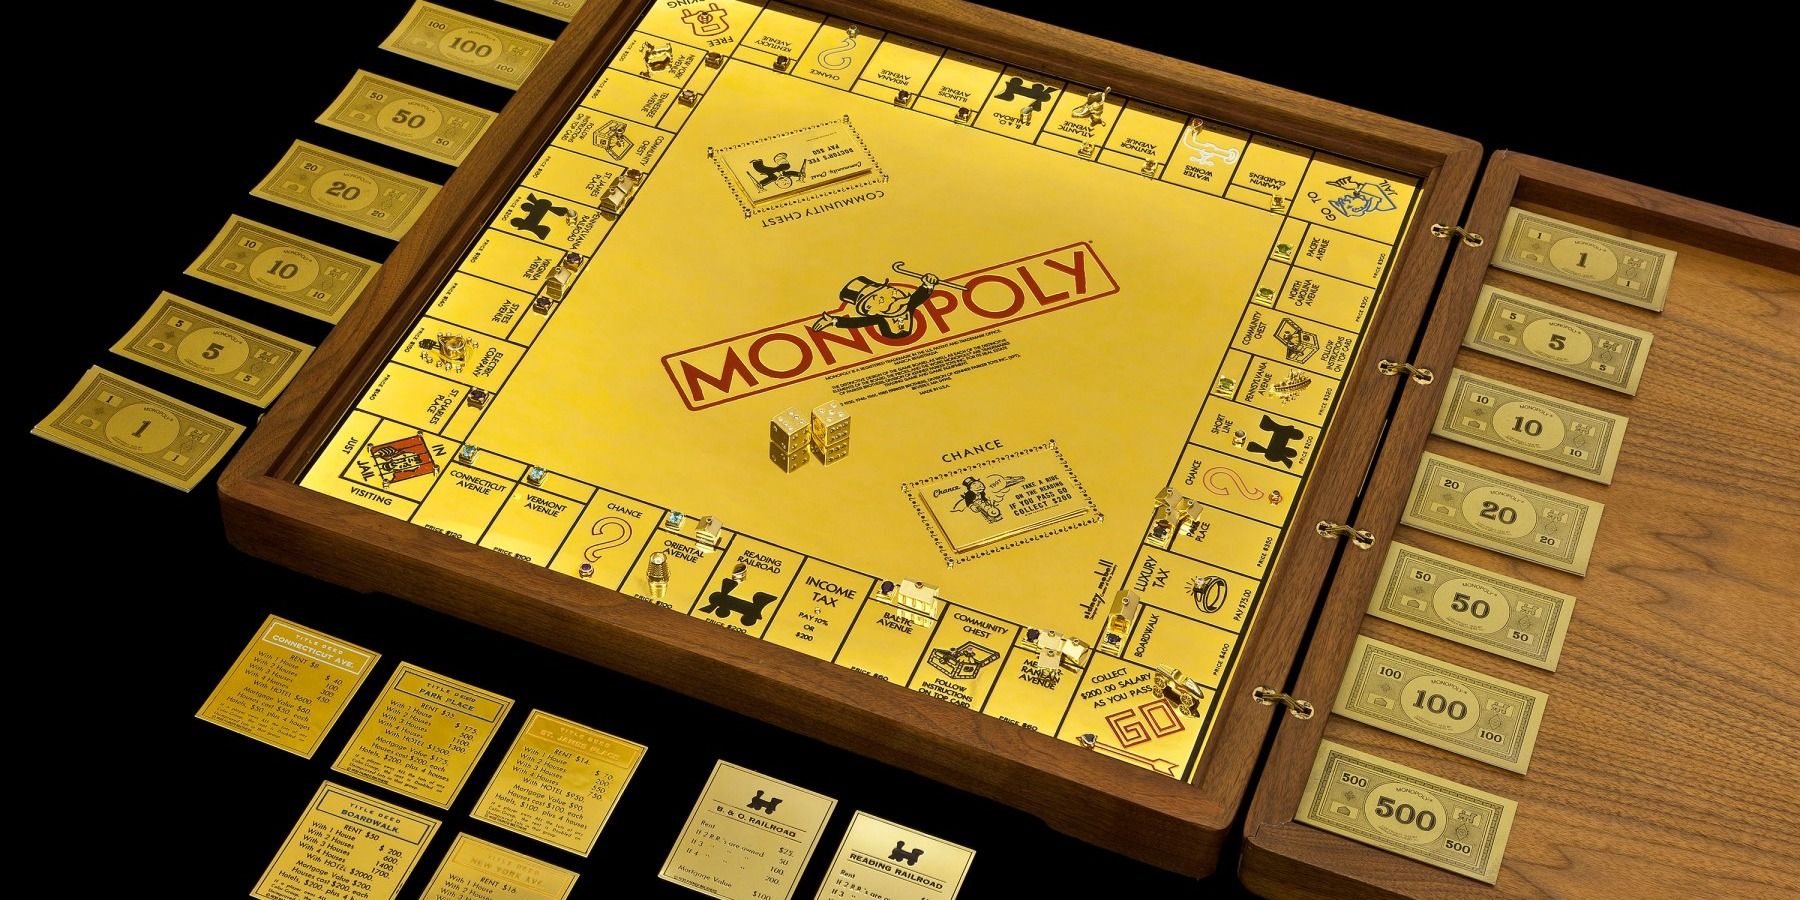 monopoly 2 million dollar version gold with wooden case